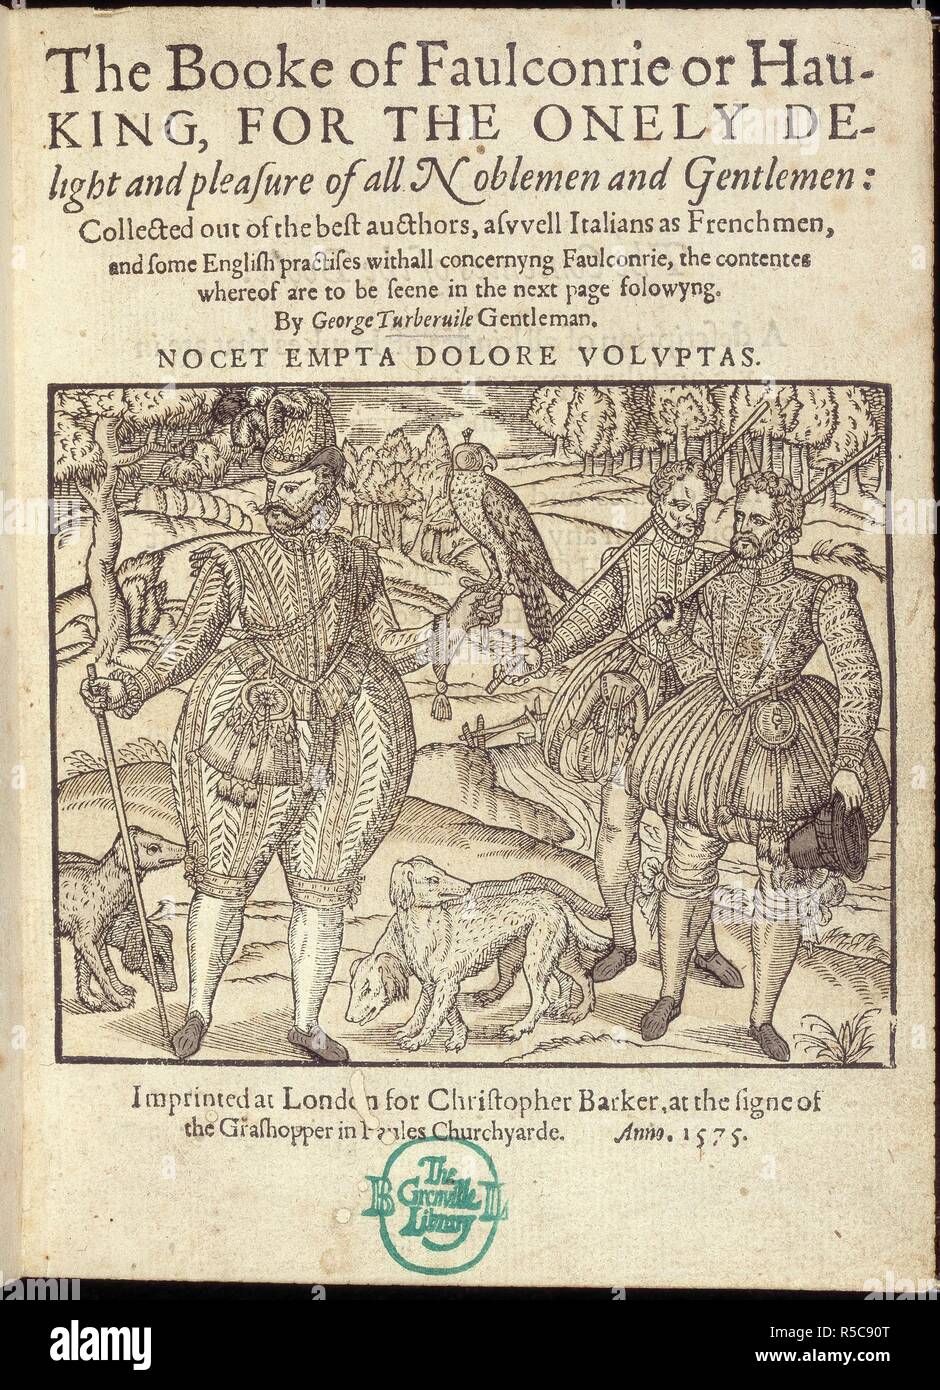 Falconry. The Booke of Faul[conrie or Hau]king for the o[nel. Christopher Barker, London, 1575. Men with falcons and dogs.  Image taken from The Booke of Faul[conrie or Hau]king for the o[nely de]light and pleasure of all Nobleme[n & Gentlemen]. Collected out of the bestAucthors as well Itali[an as Frenchmen] and some English practices withall concerning Faulconri[e], etc.  Originally published/produced in Christopher Barker, London, 1575. . Source: G.2372.(1), frontispiece. Stock Photo